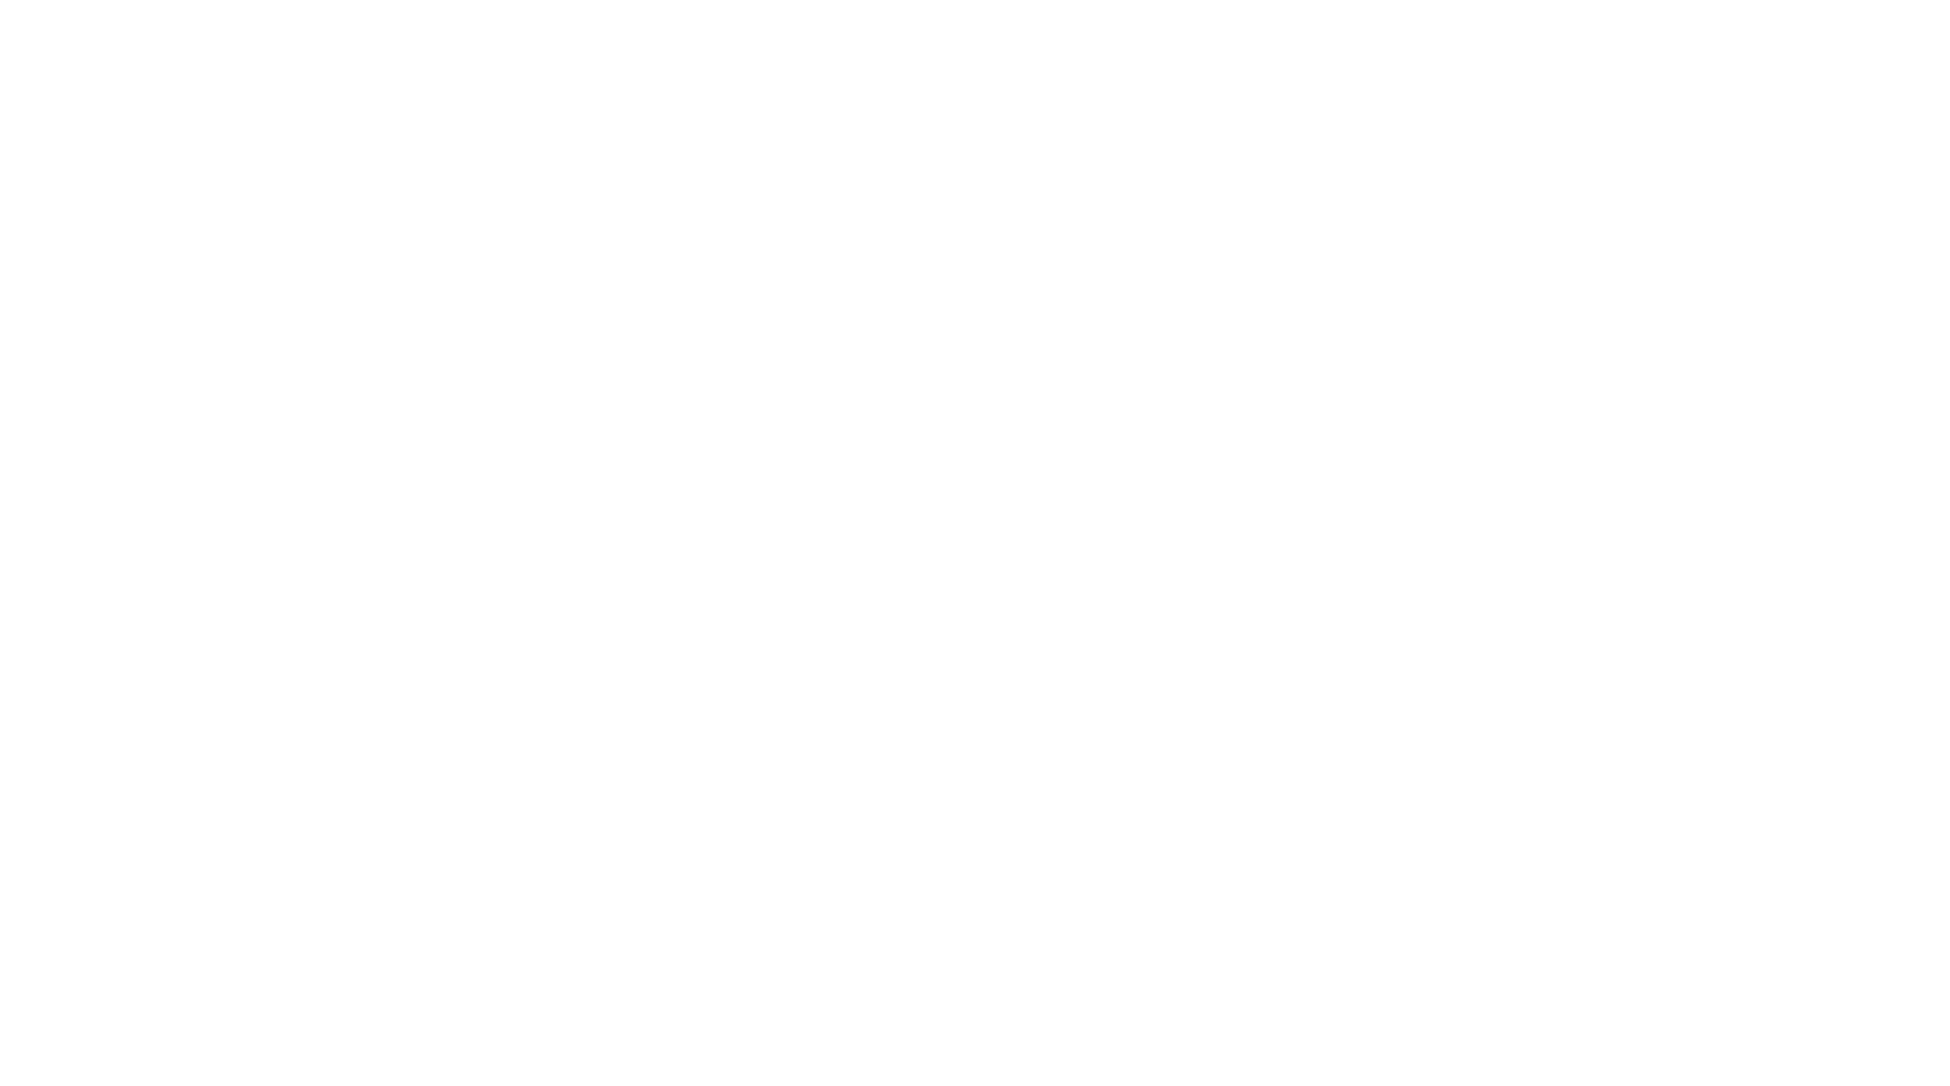 SOUTH SEATTLE COLLEGE